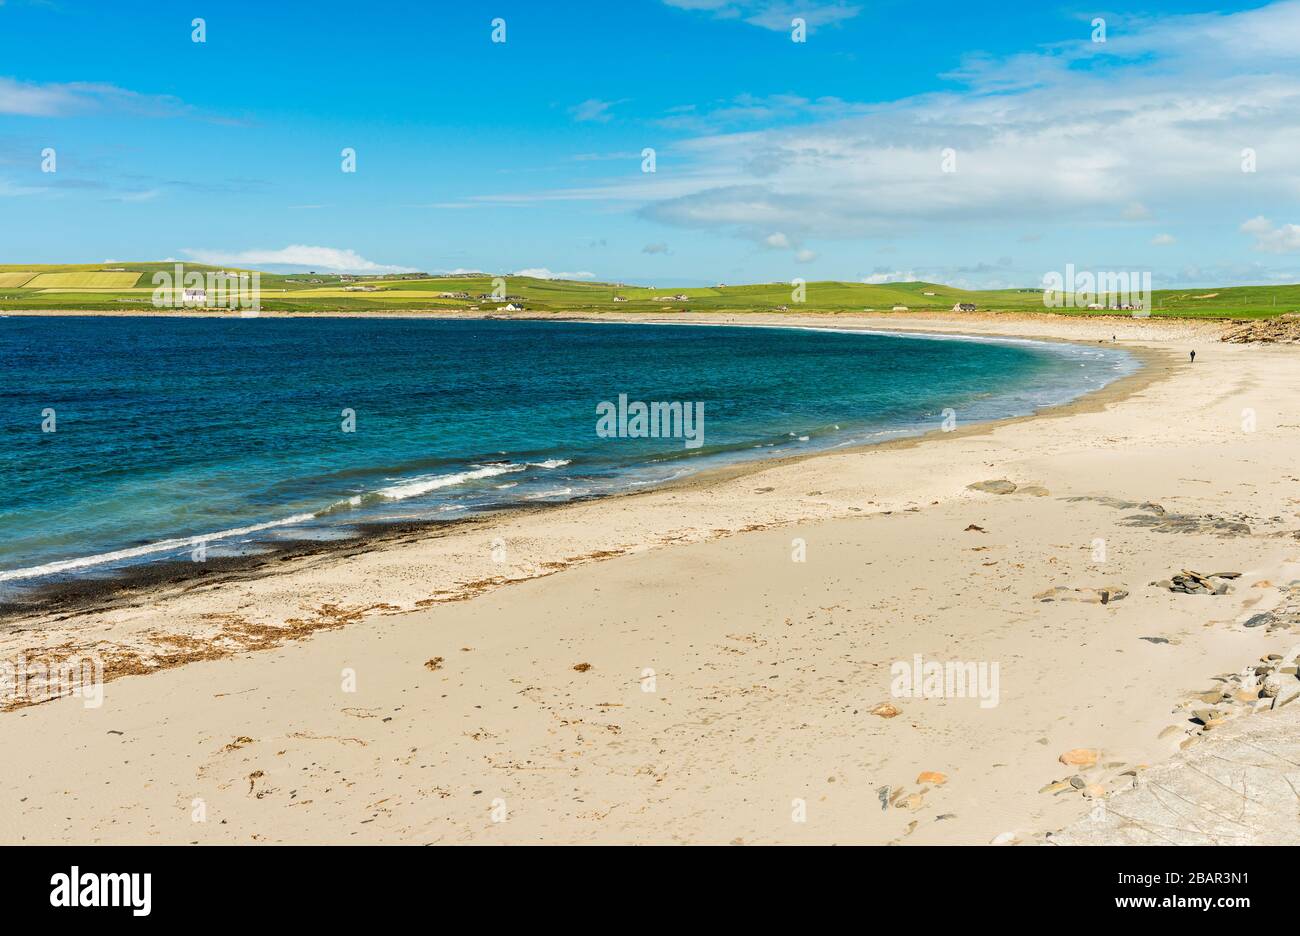 The beach at the Bay of Skaill, site of Skara Brae Neolithic settlement, Orkney, Scotland, UK. Stock Photo